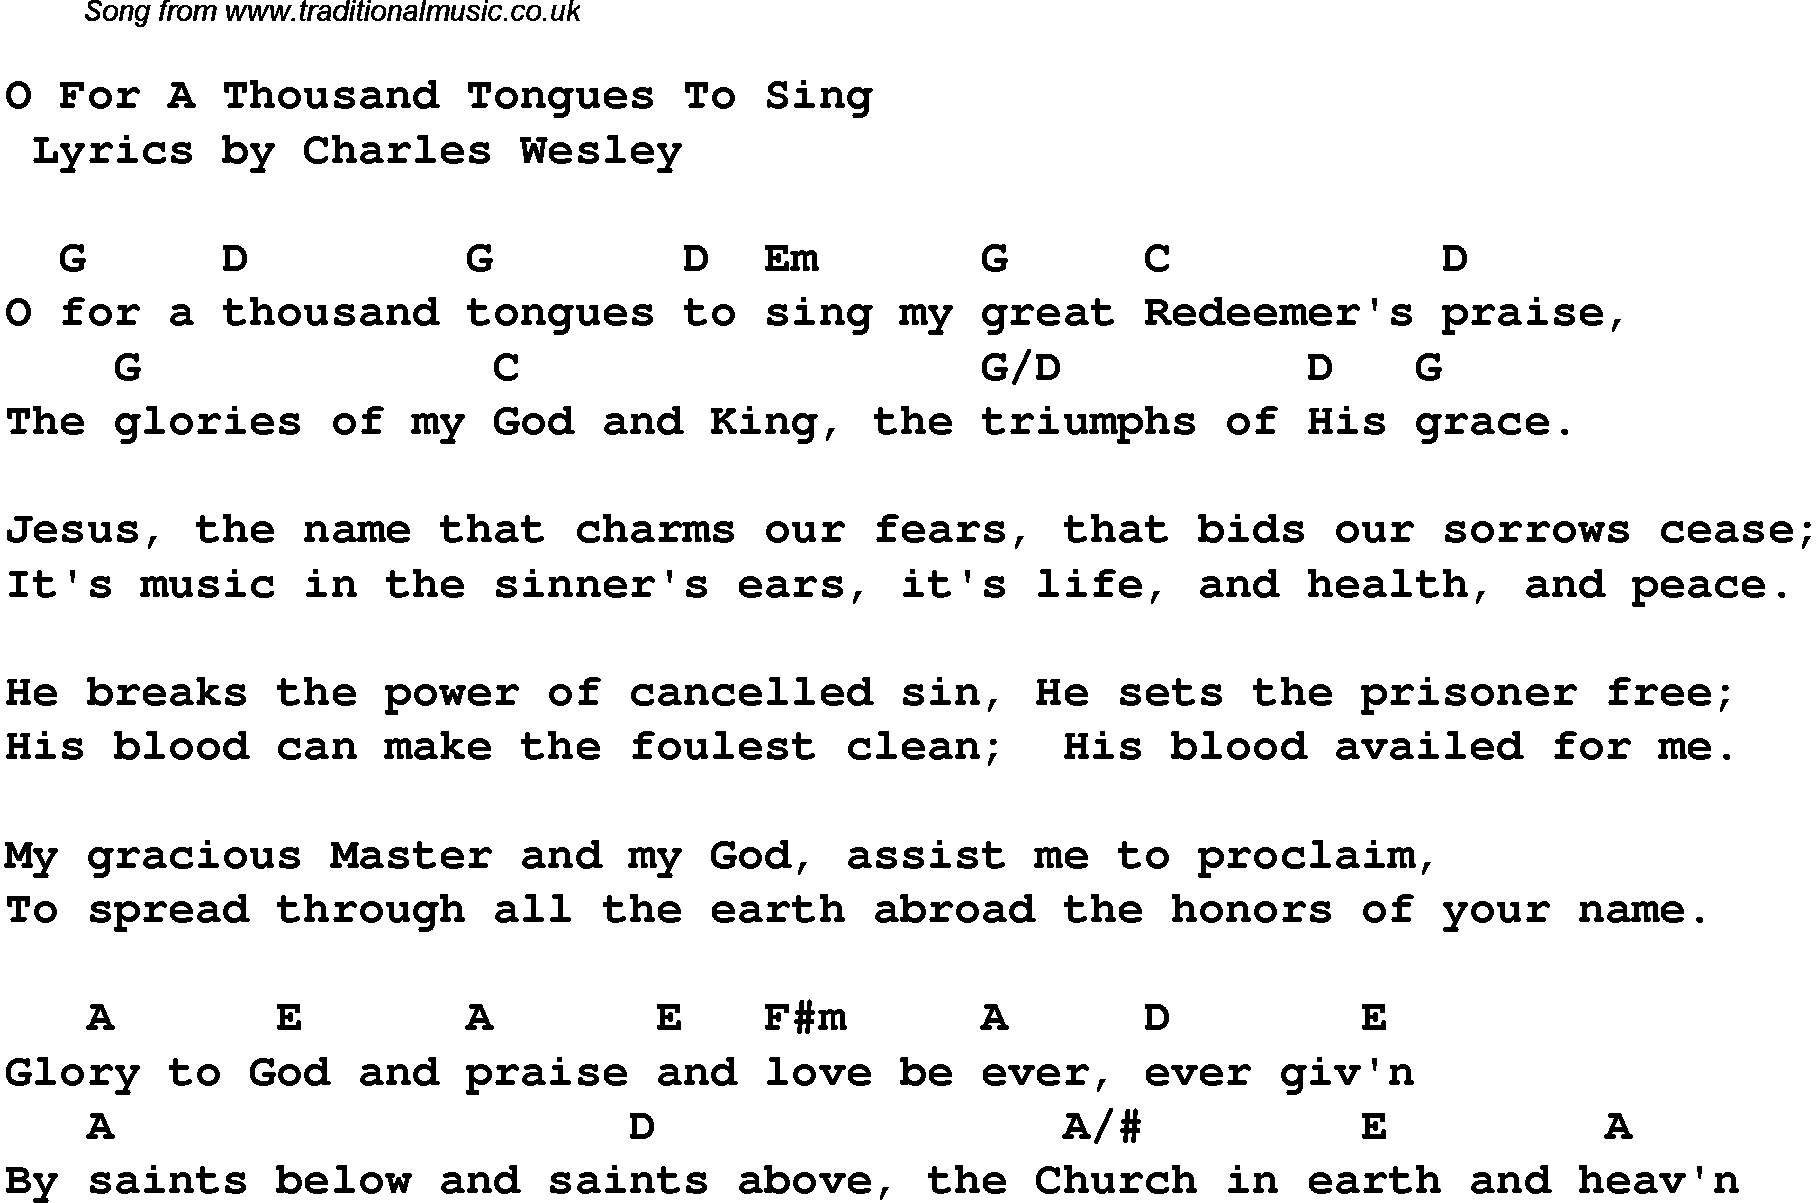 Gospel Song: o-for-a-thousand-tongues-to-sing, lyrics and chords.